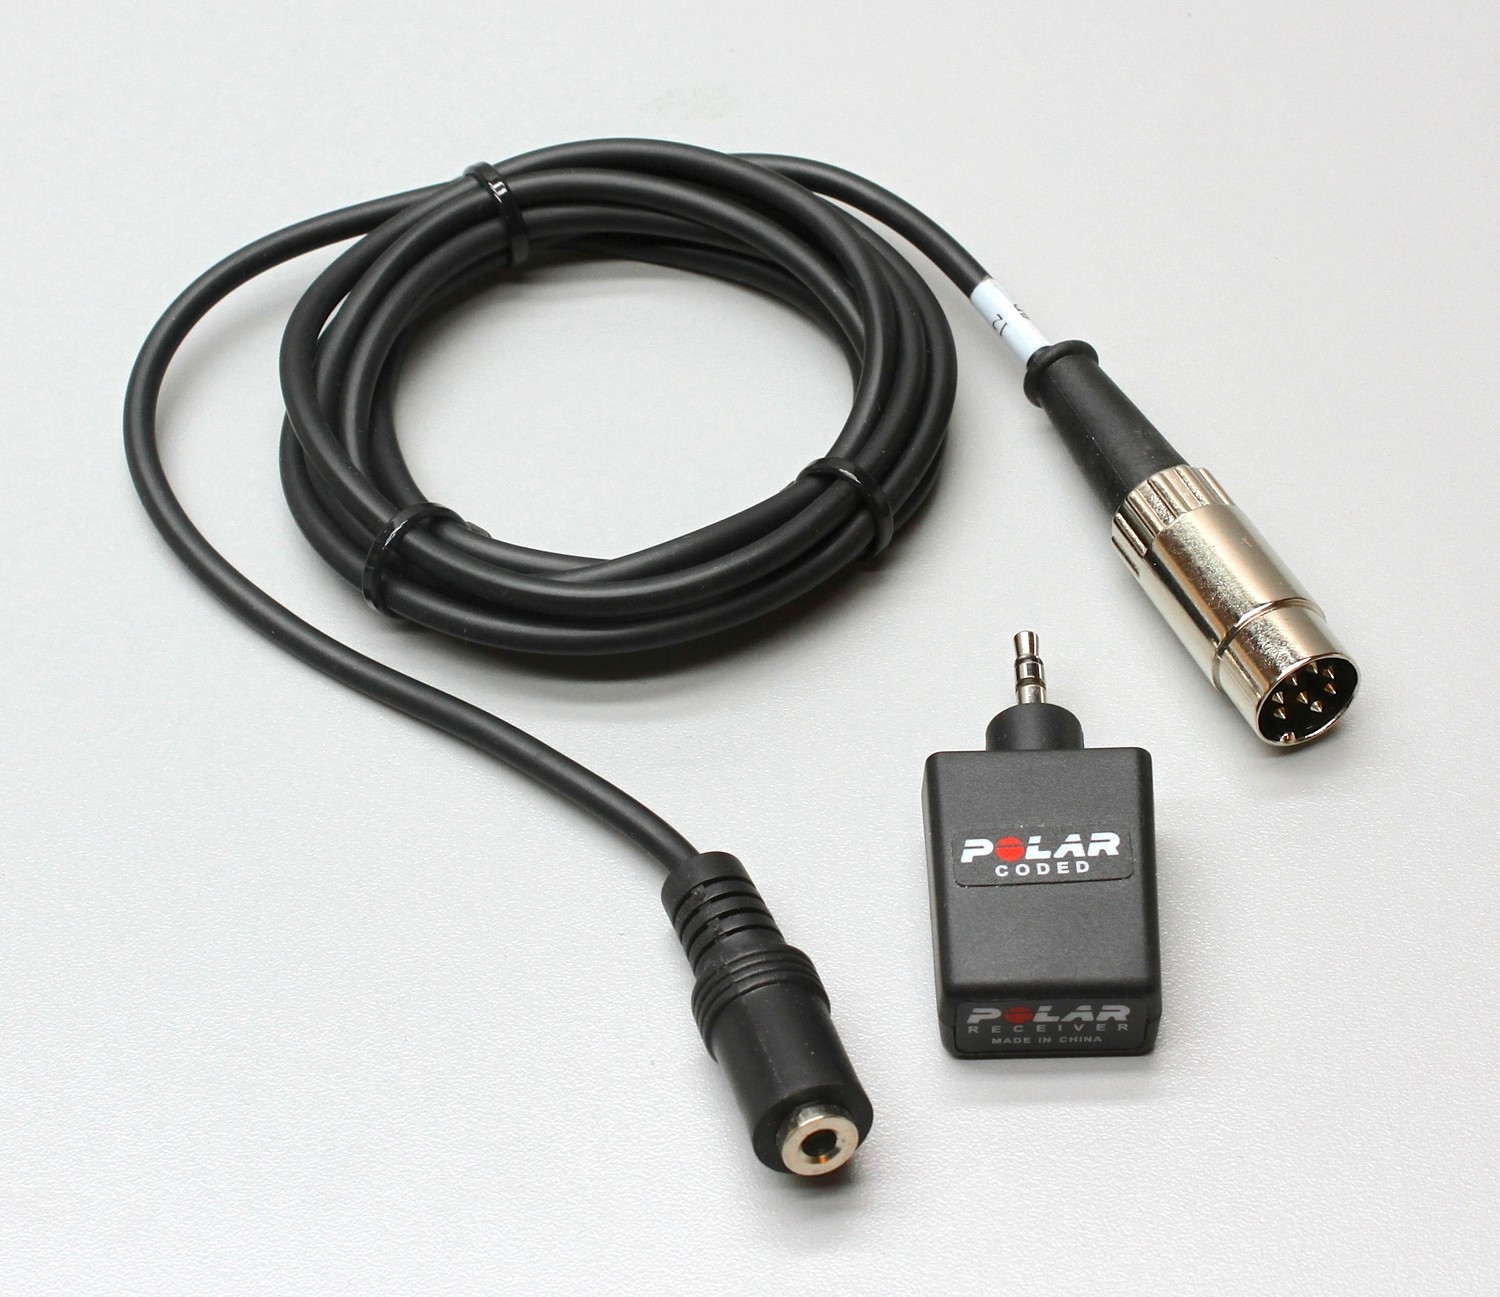 Polar(R) Heart Rate Receiver with 6' adapter cable